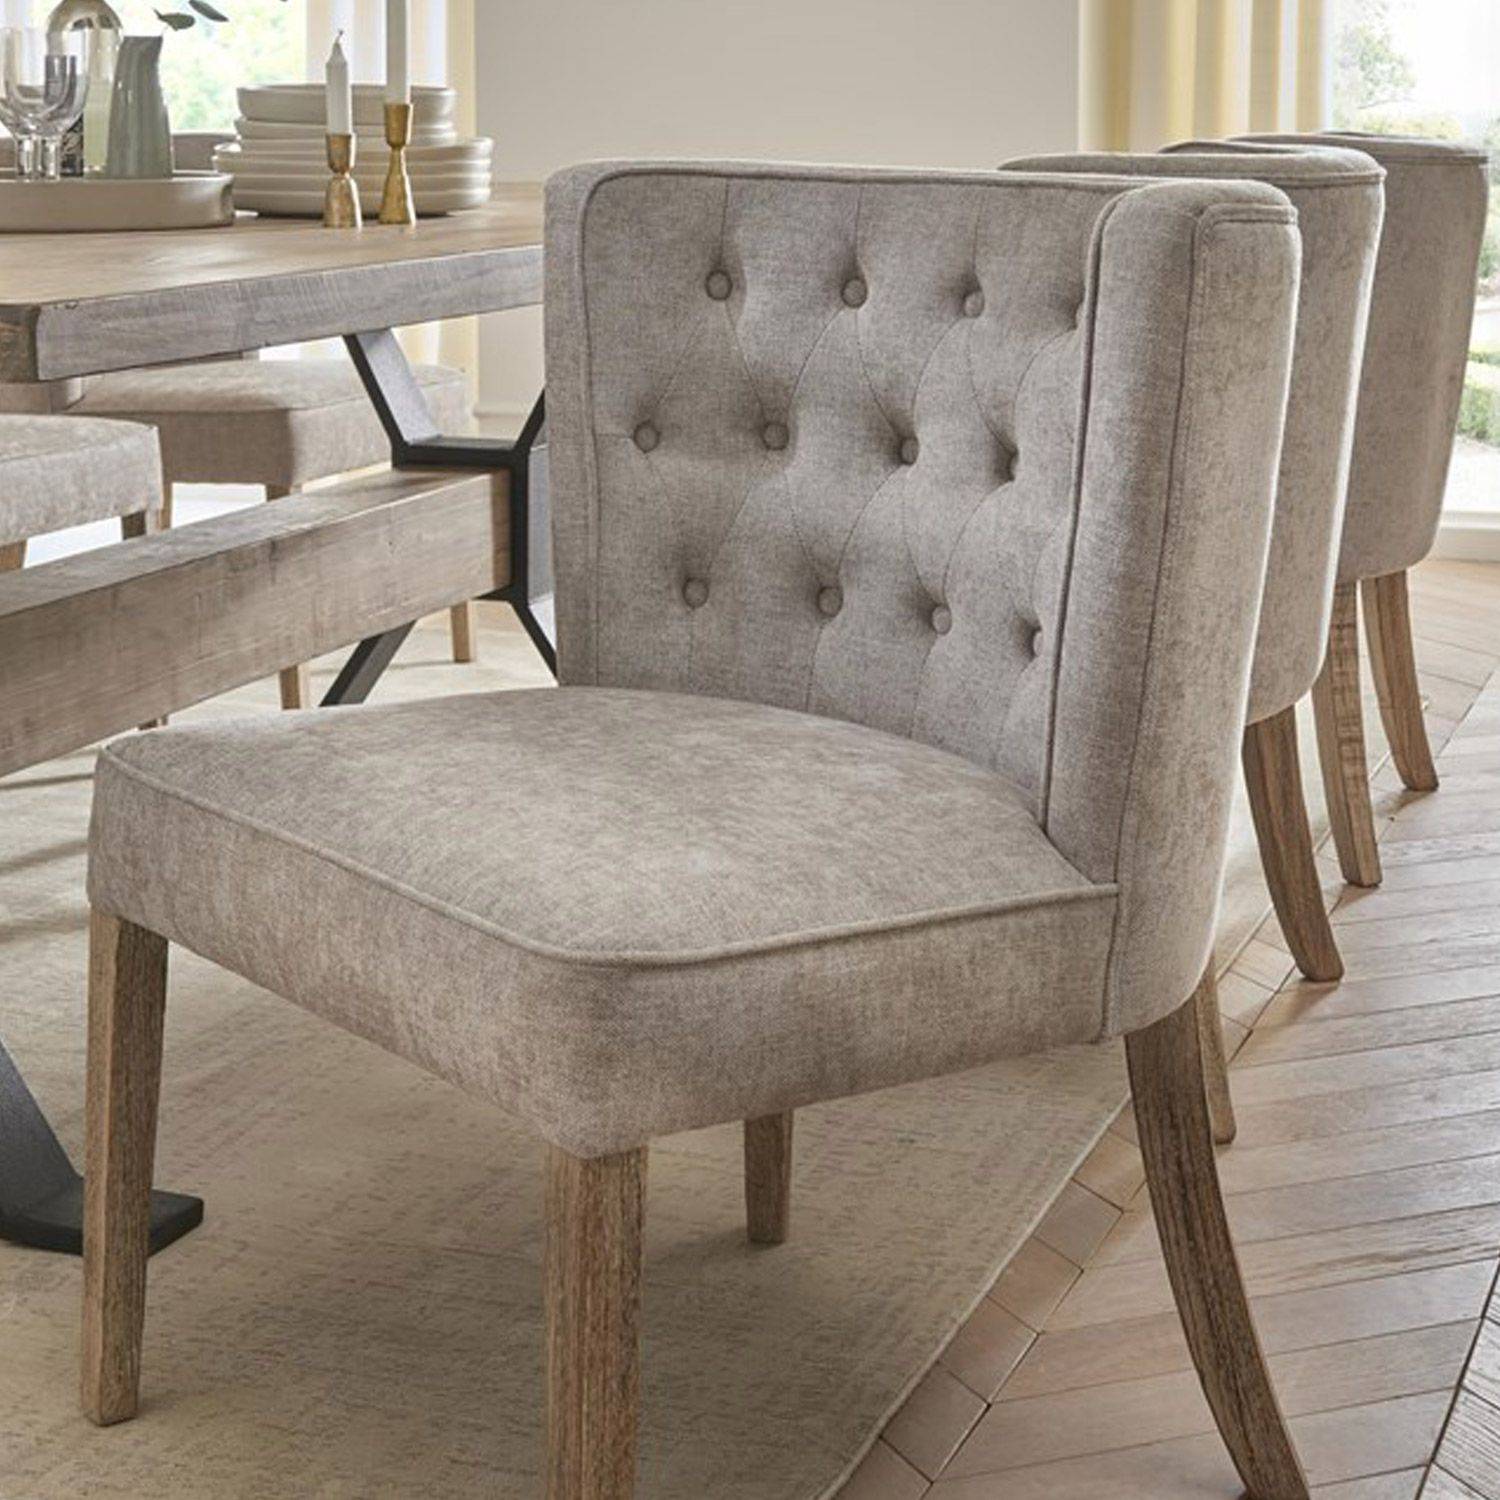 Beautiful Dining chair From The Kingswood Collection At BF Home